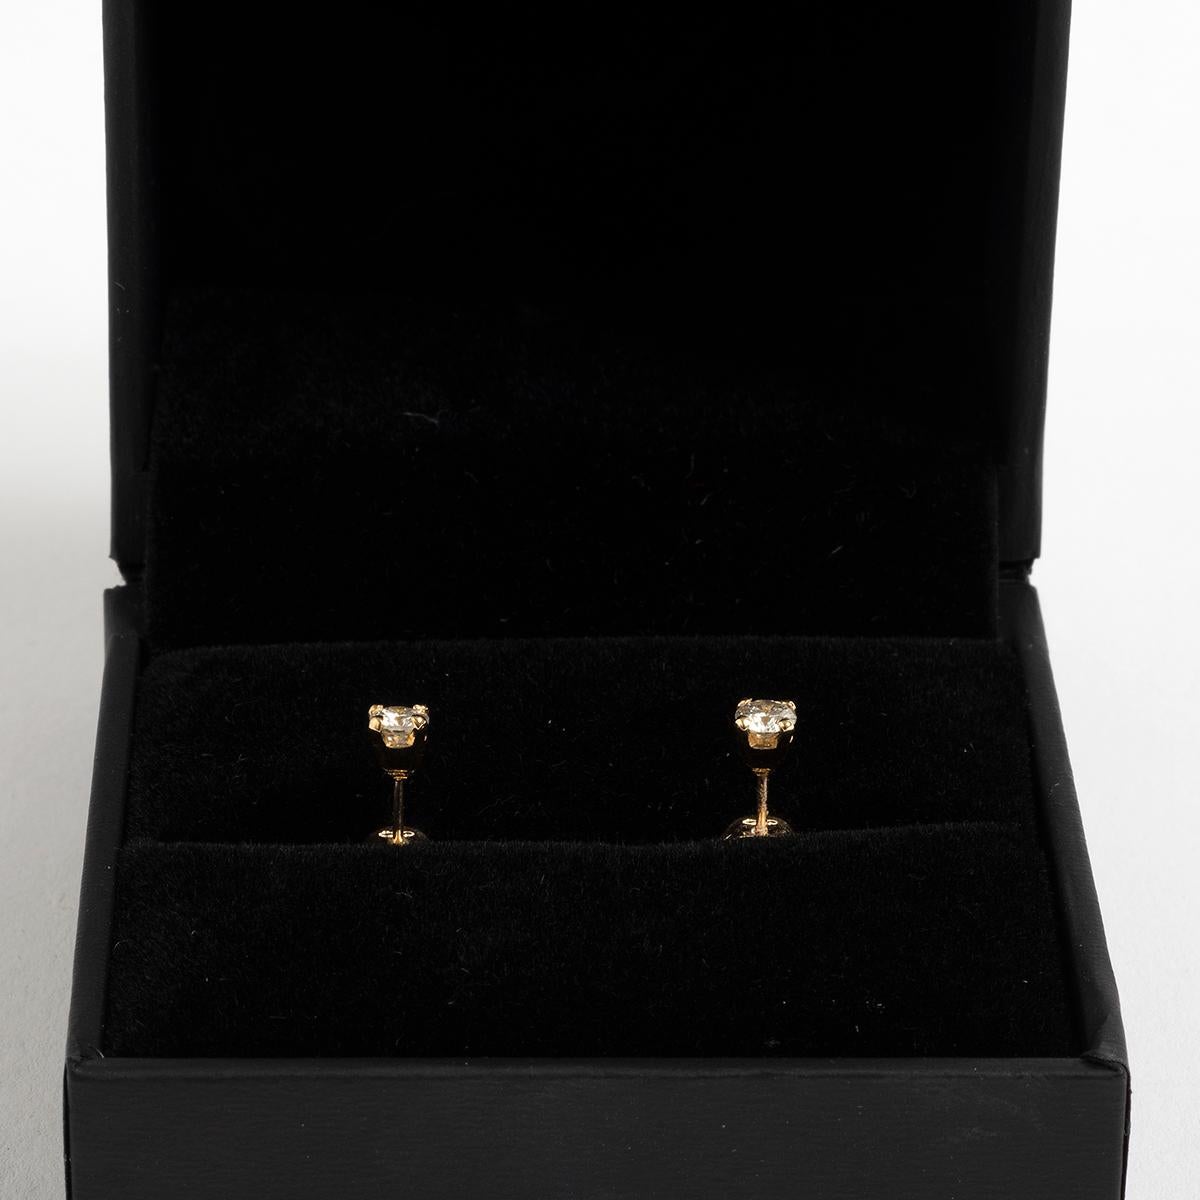 Our classic diamond ear studs in 9k yellow gold feature diamond solitaires of est. .30ct